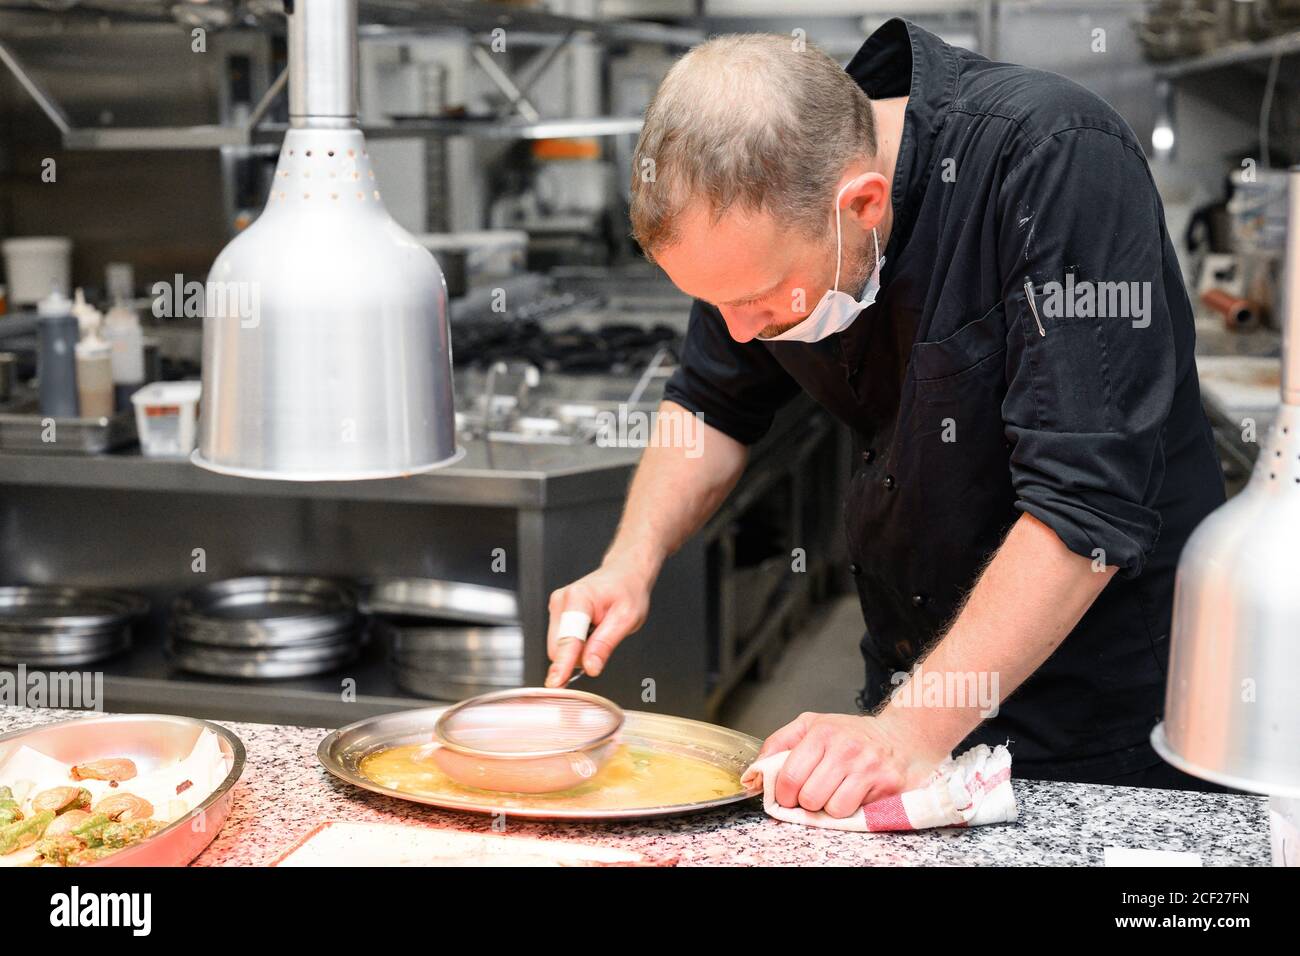 Chef in uniform cooking in a commercial kitchen. Male cook standing by kitchen counter preparing food. High quality photo. Stock Photo